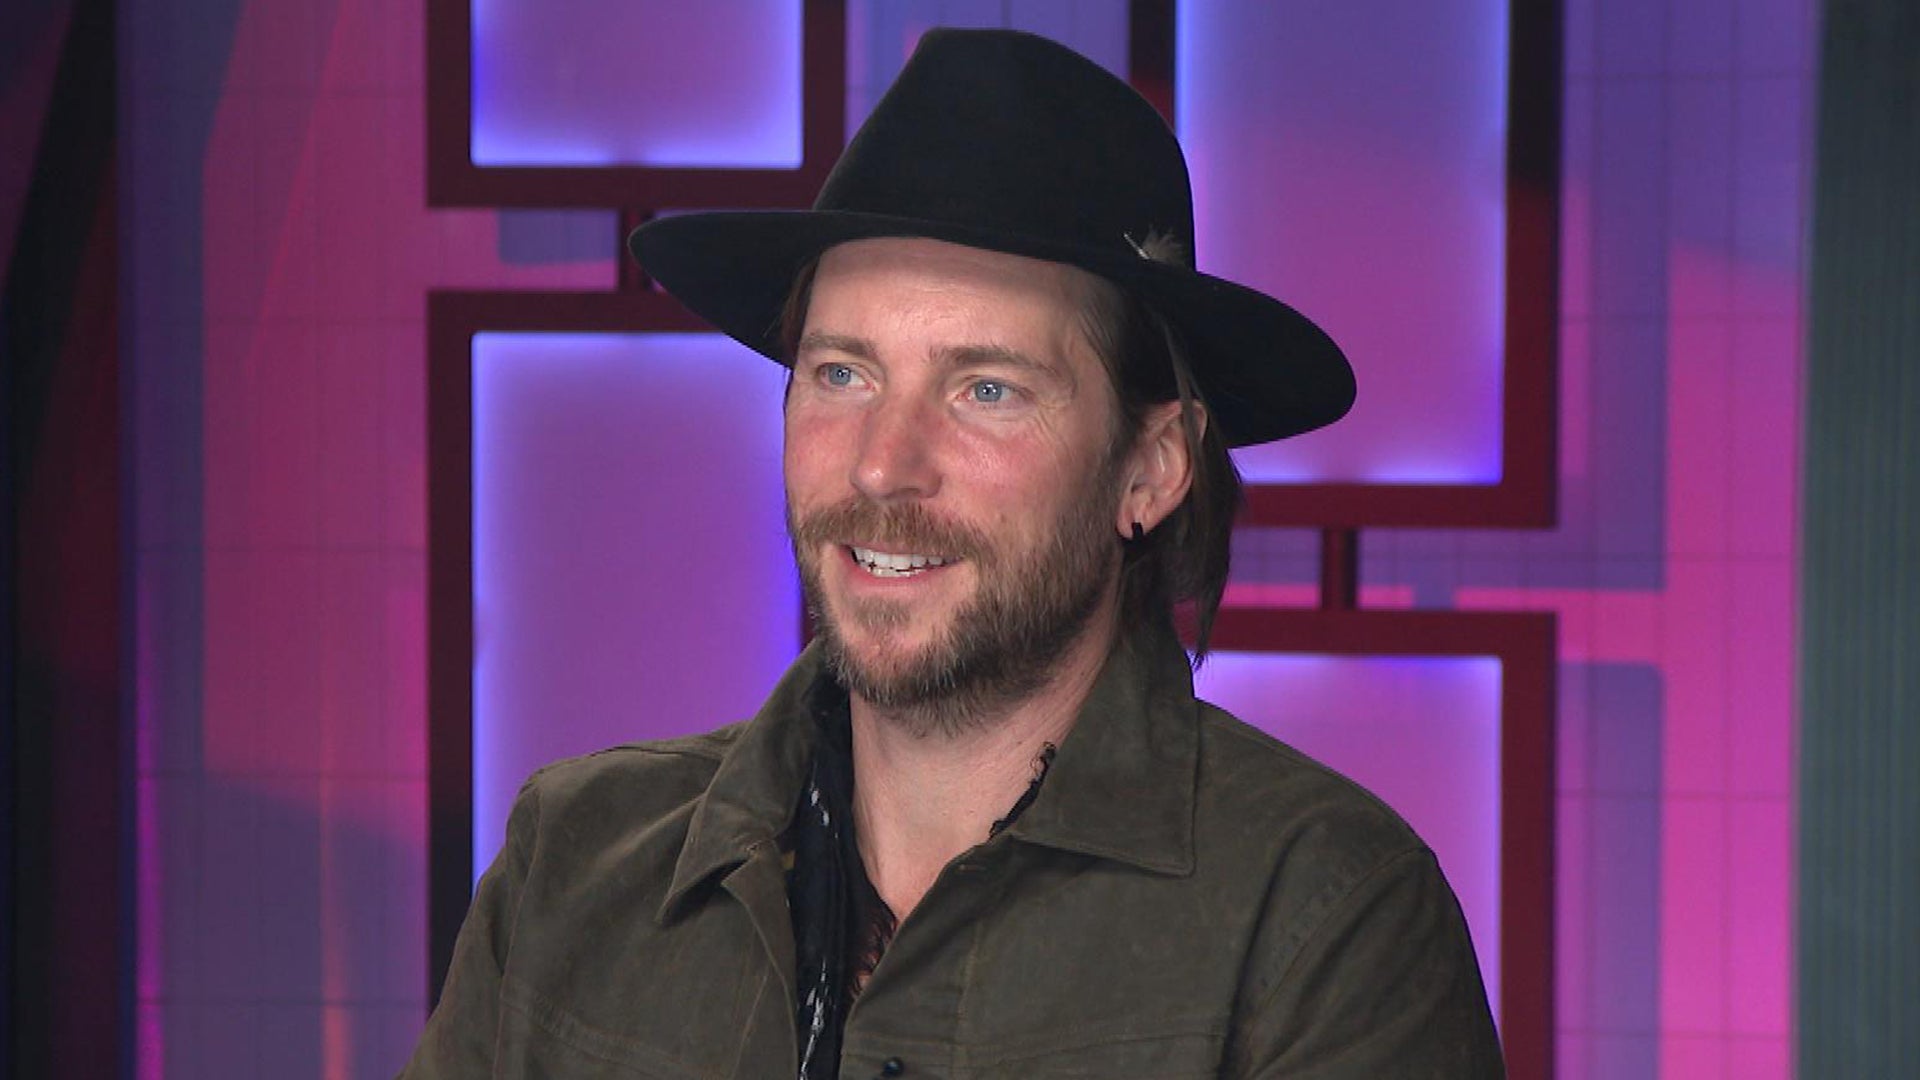 Troy Baker Shares Hope for Pedro Pascal and His Willingness To